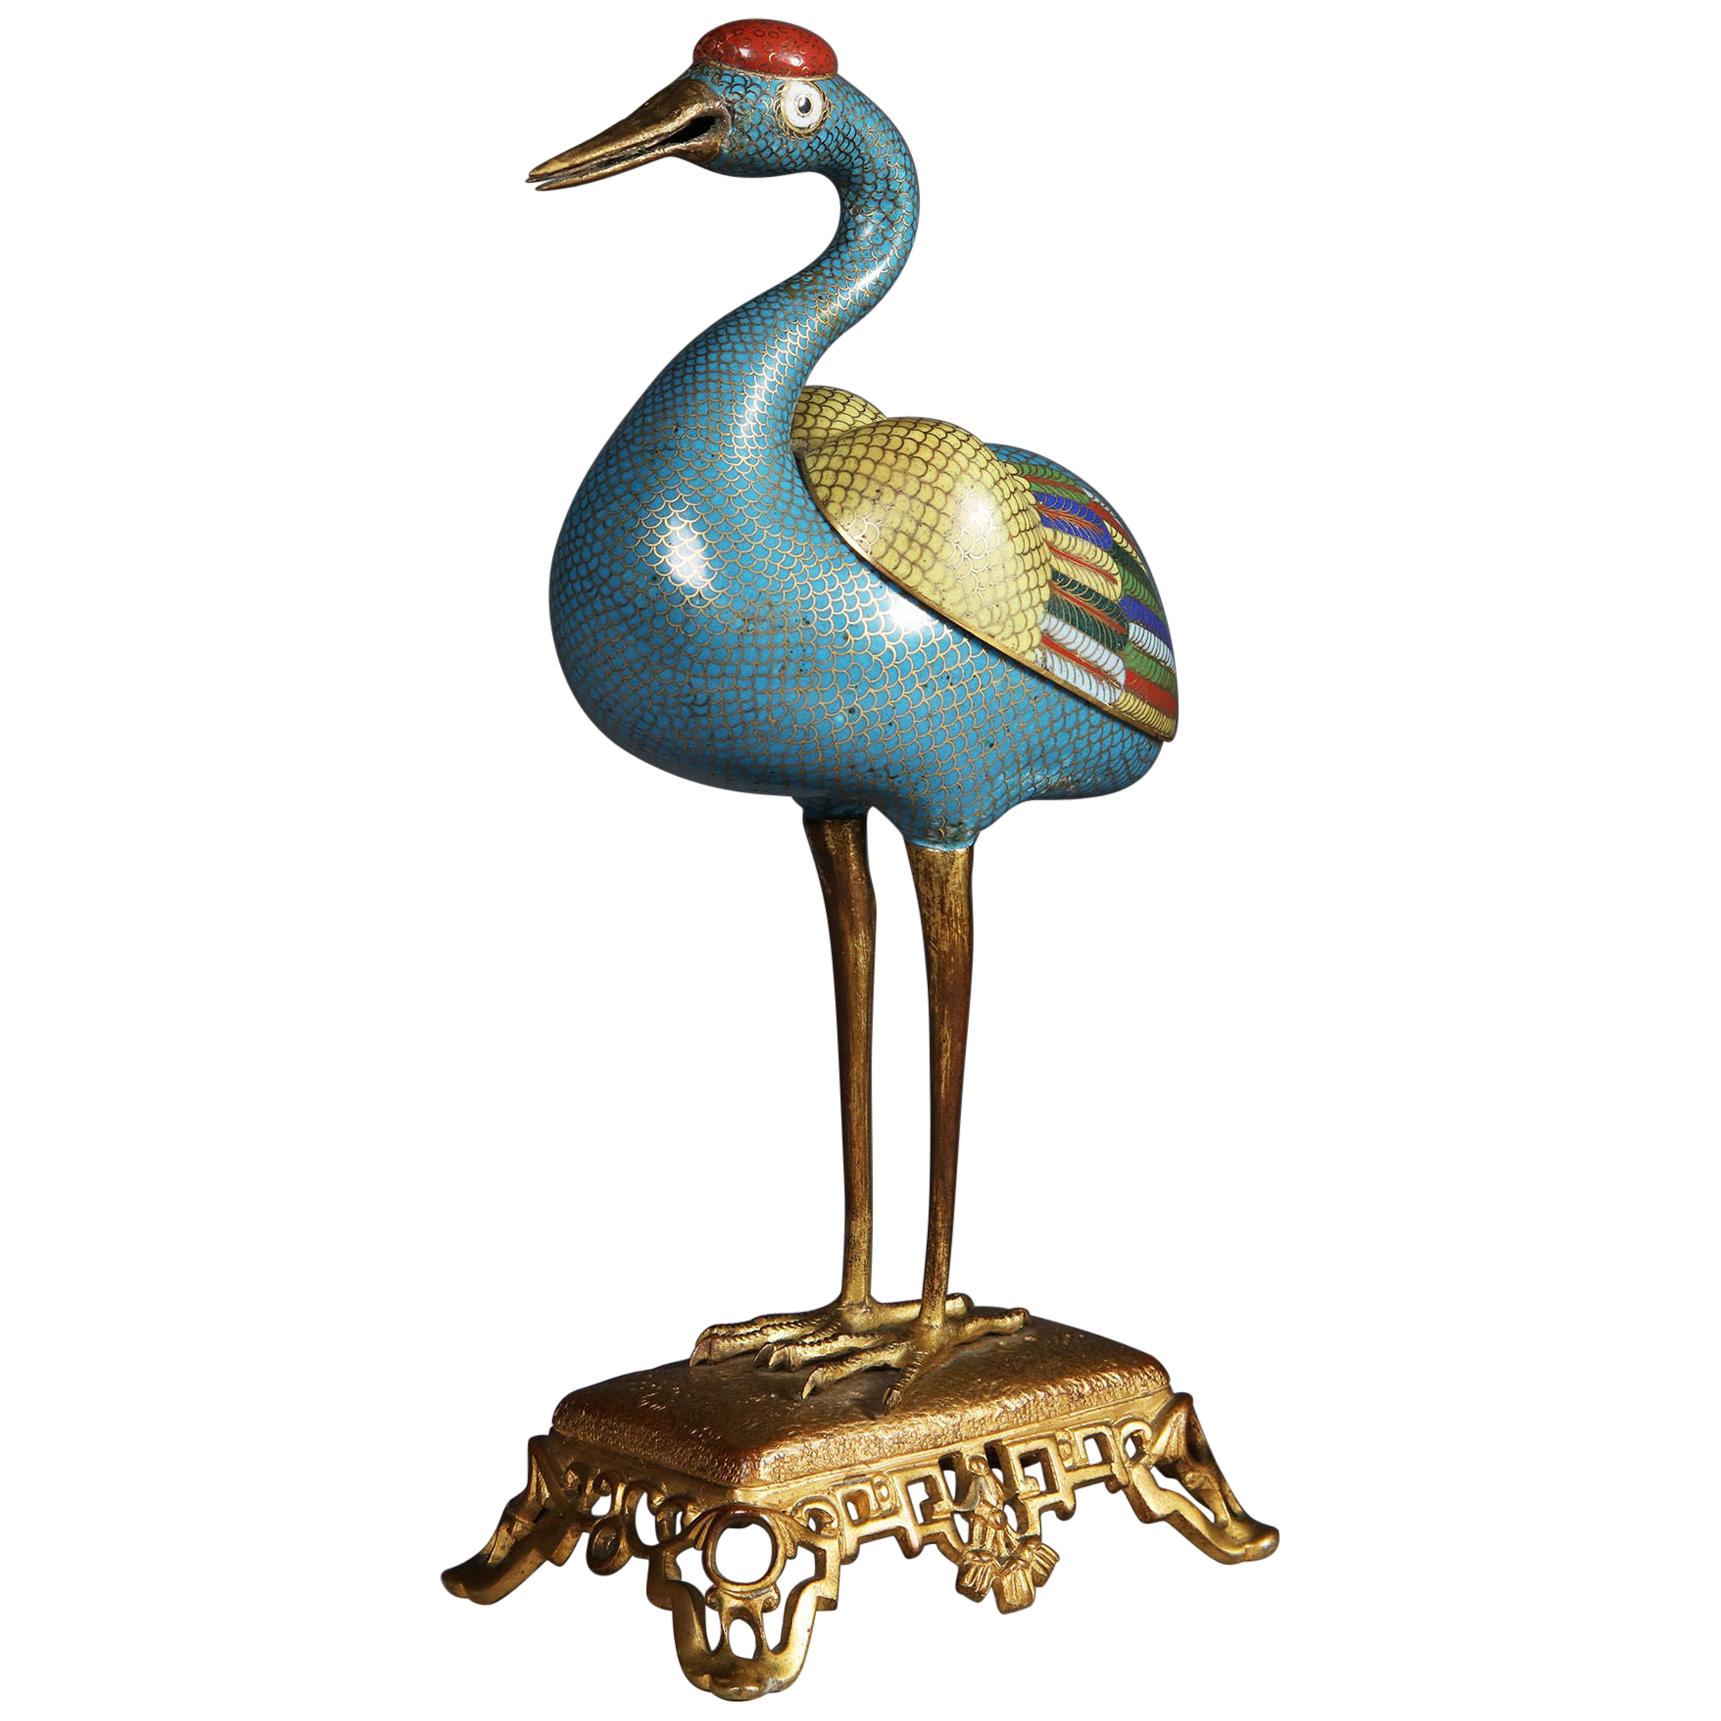 Chinese Cloisonné Enamel Censer Modelled as a Crane Qing Dynasty